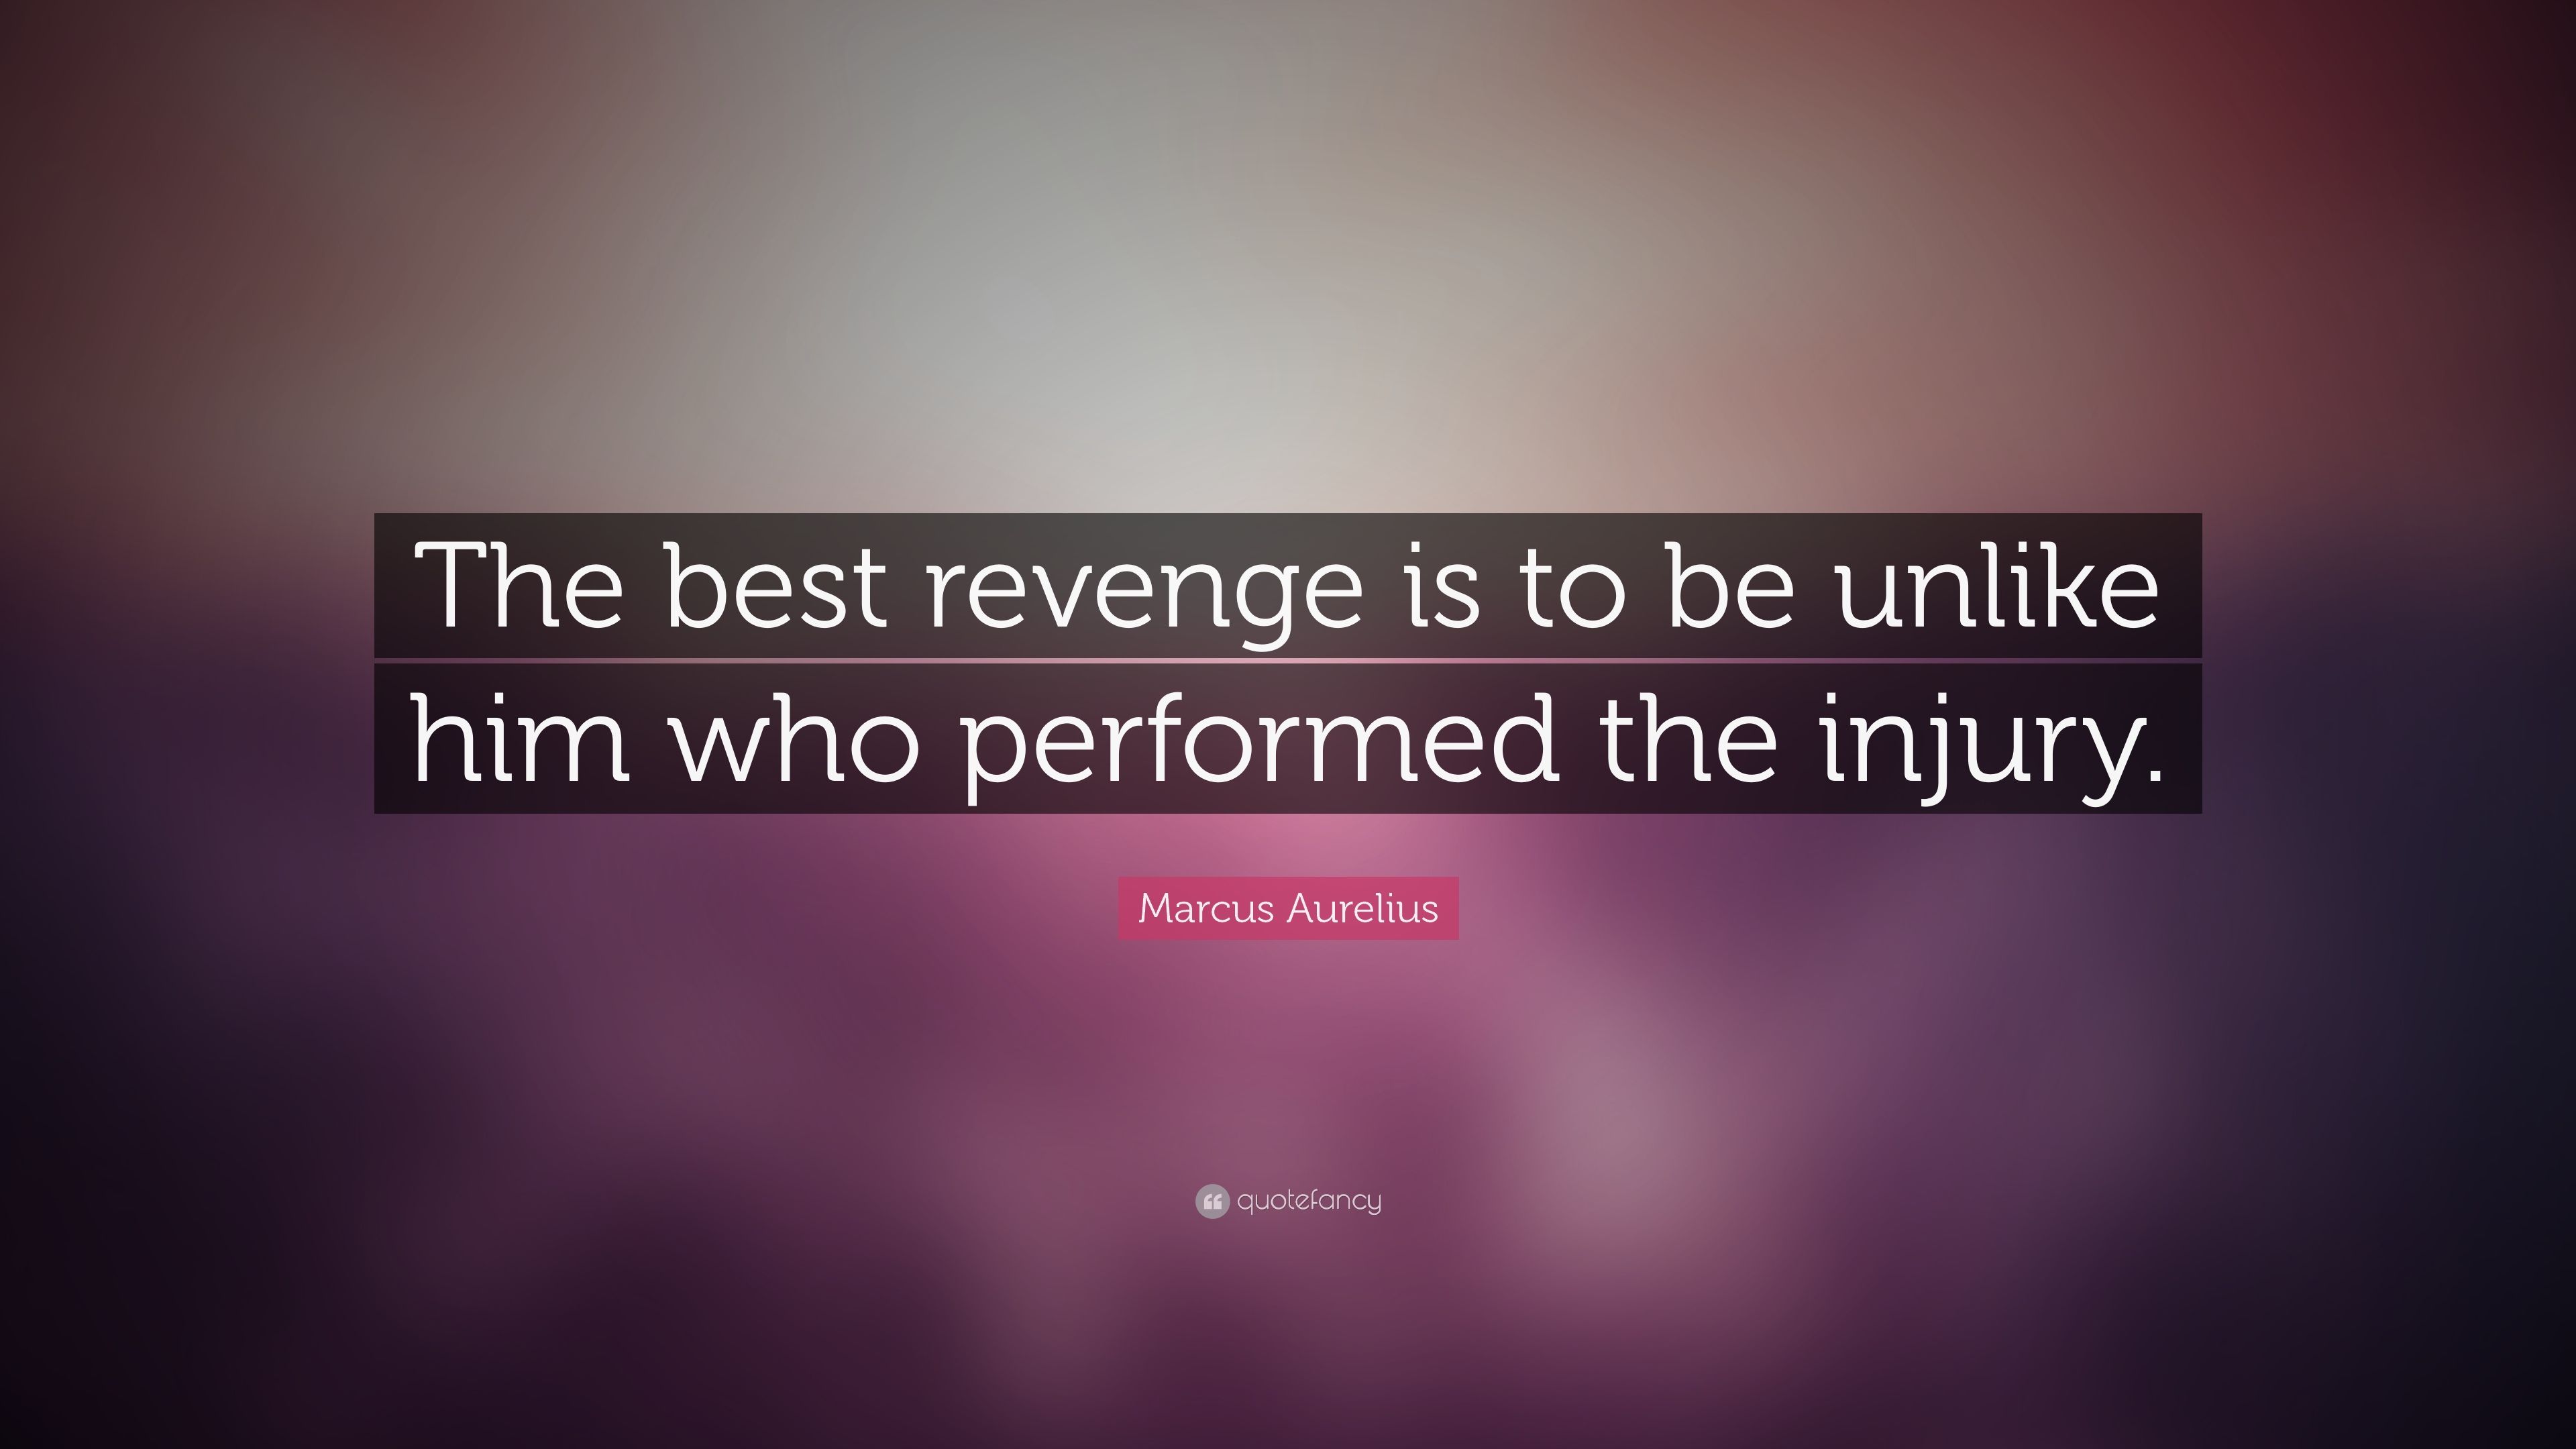 Marcus Aurelius Quote: “The best revenge is to be unlike him who